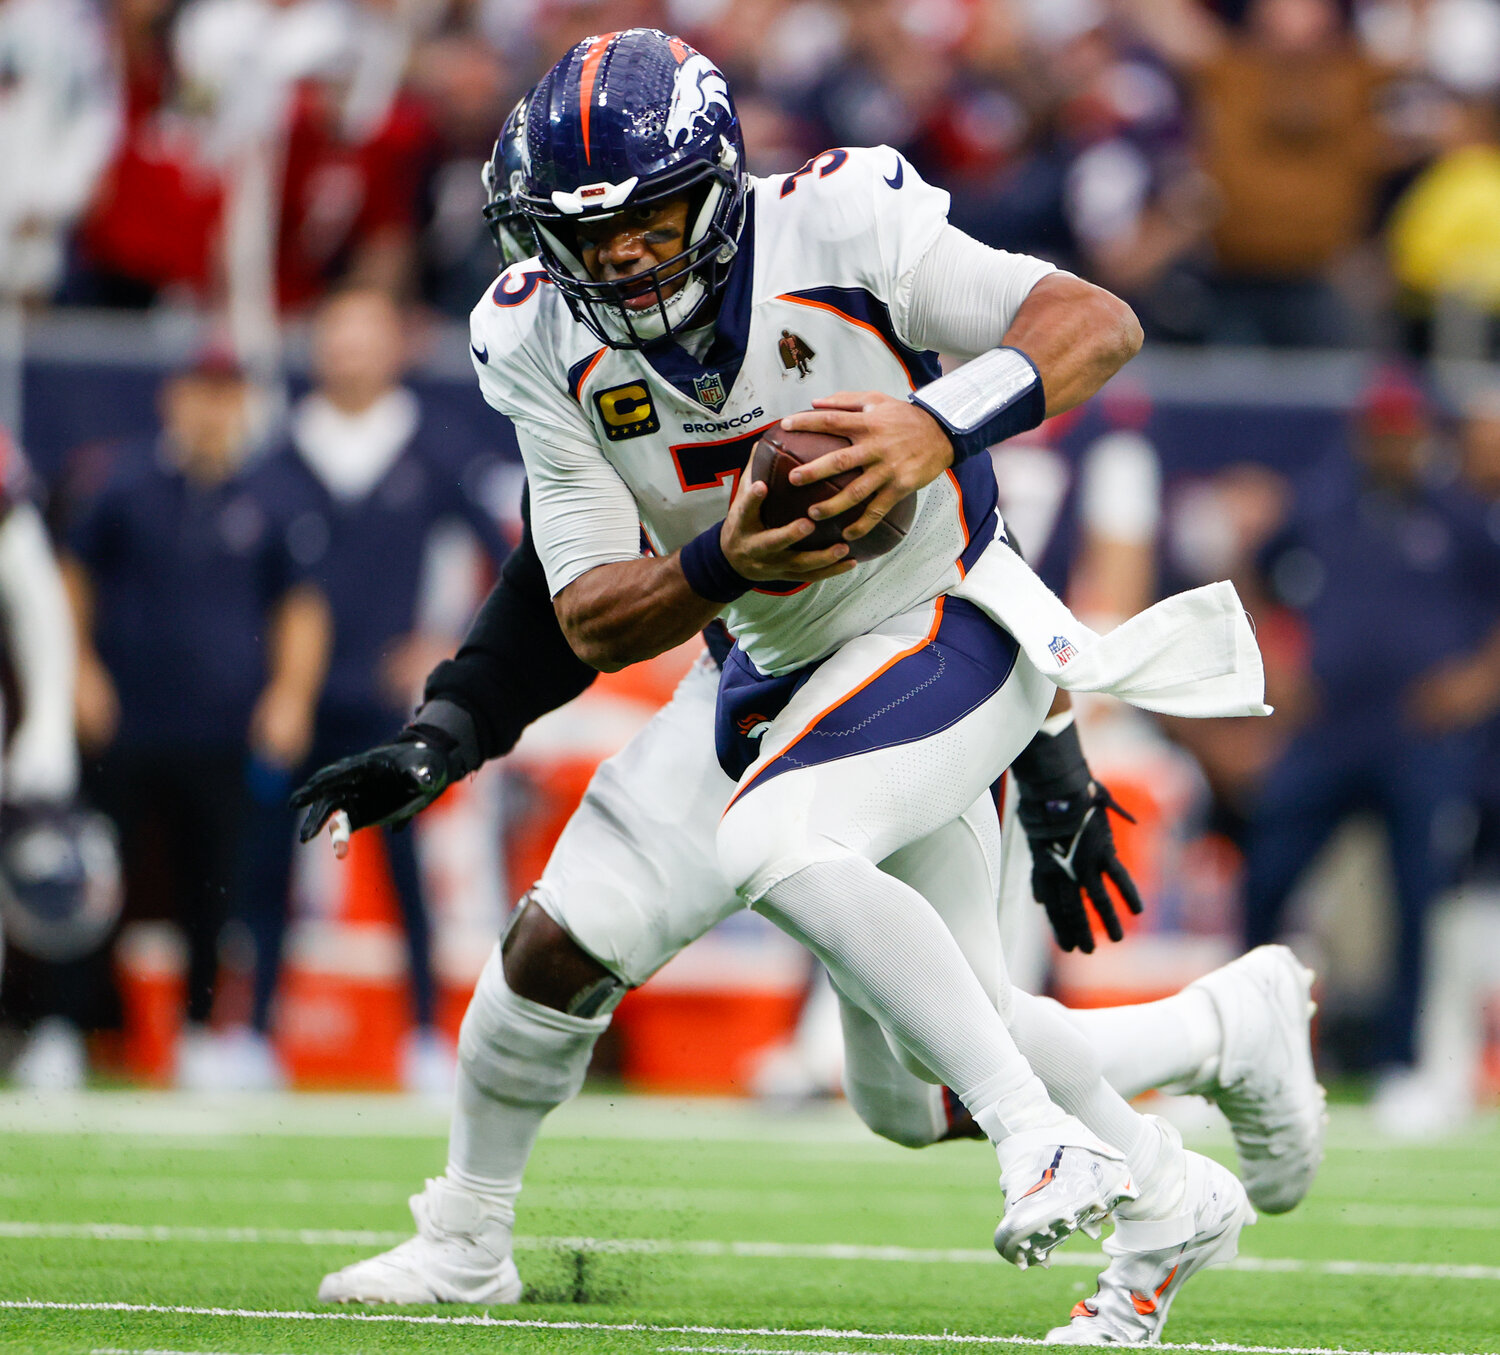 Broncos quarterback Russell Wilson (3) carries the ball for a first down during an NFL game between the Texans and the Broncos on December 3, 2023 in Houston. The Texans won, 22-17.